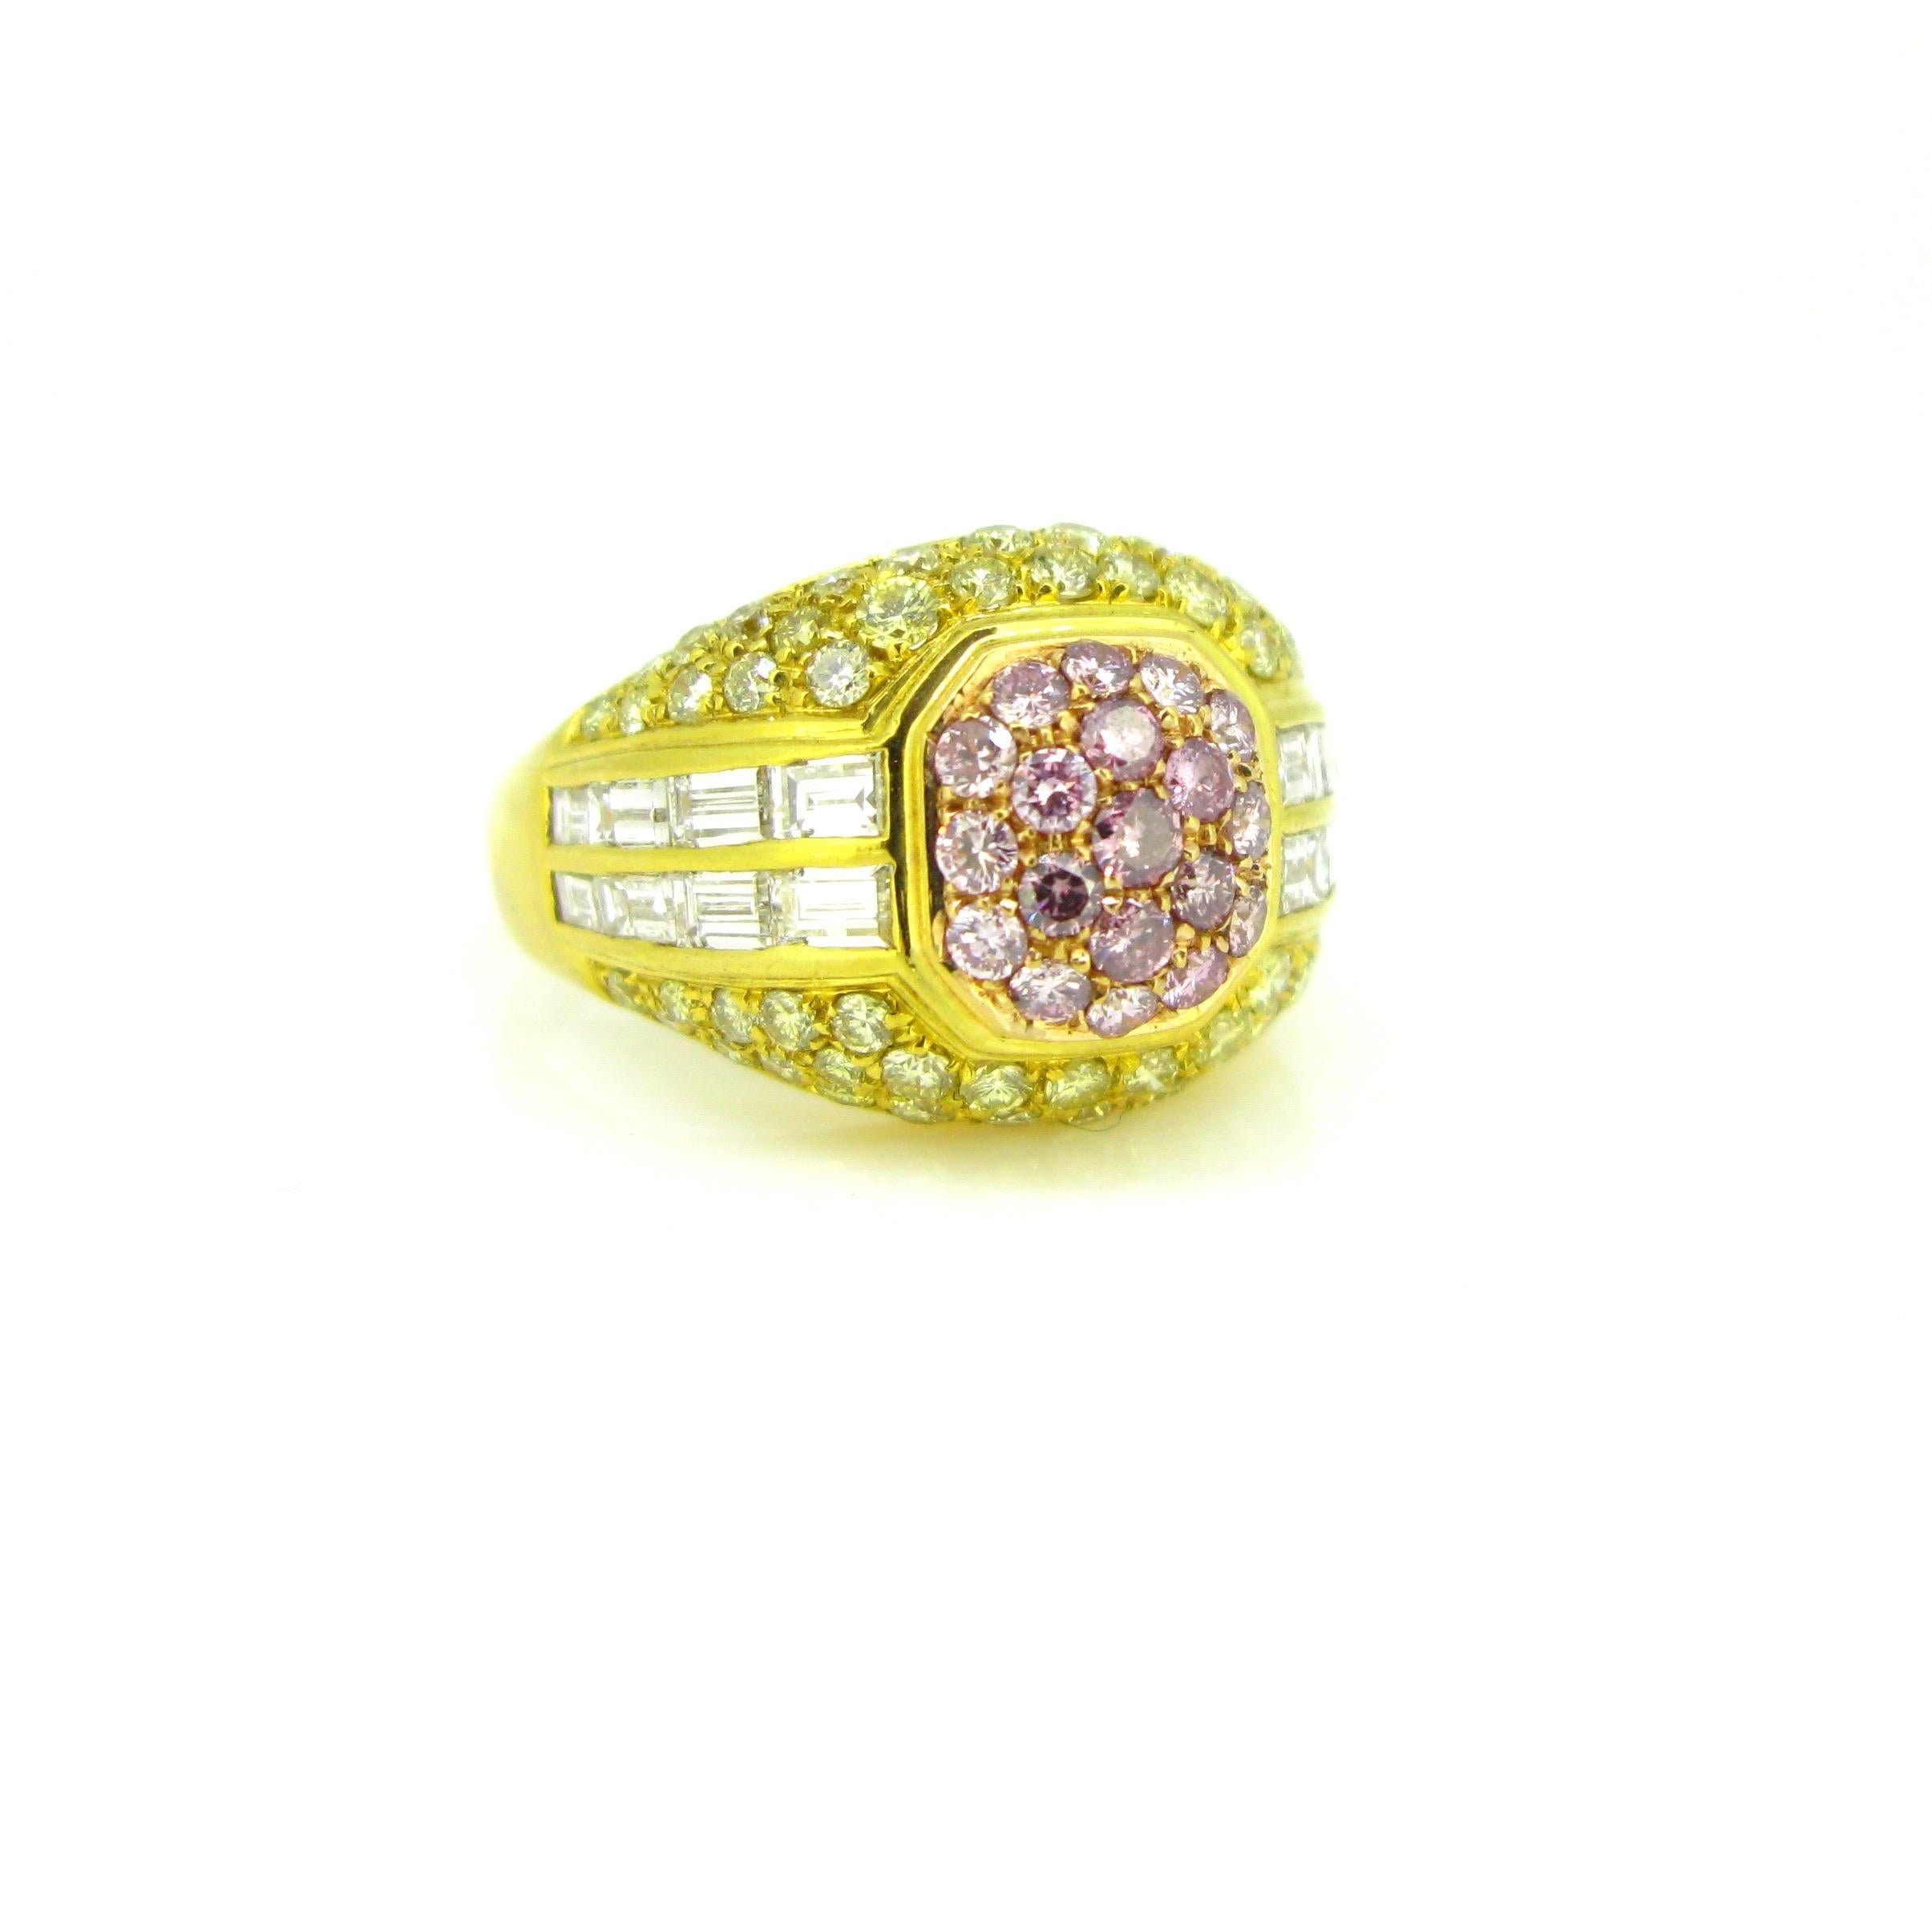 This new modern ring is made in 18kt yellow gold. It features 19 pink diamonds, 58 yellow diamonds and 16 tappers with a total carat weight of around 2.50ct. The coloured diamonds make the ring a really colourful and fun design. The centre features